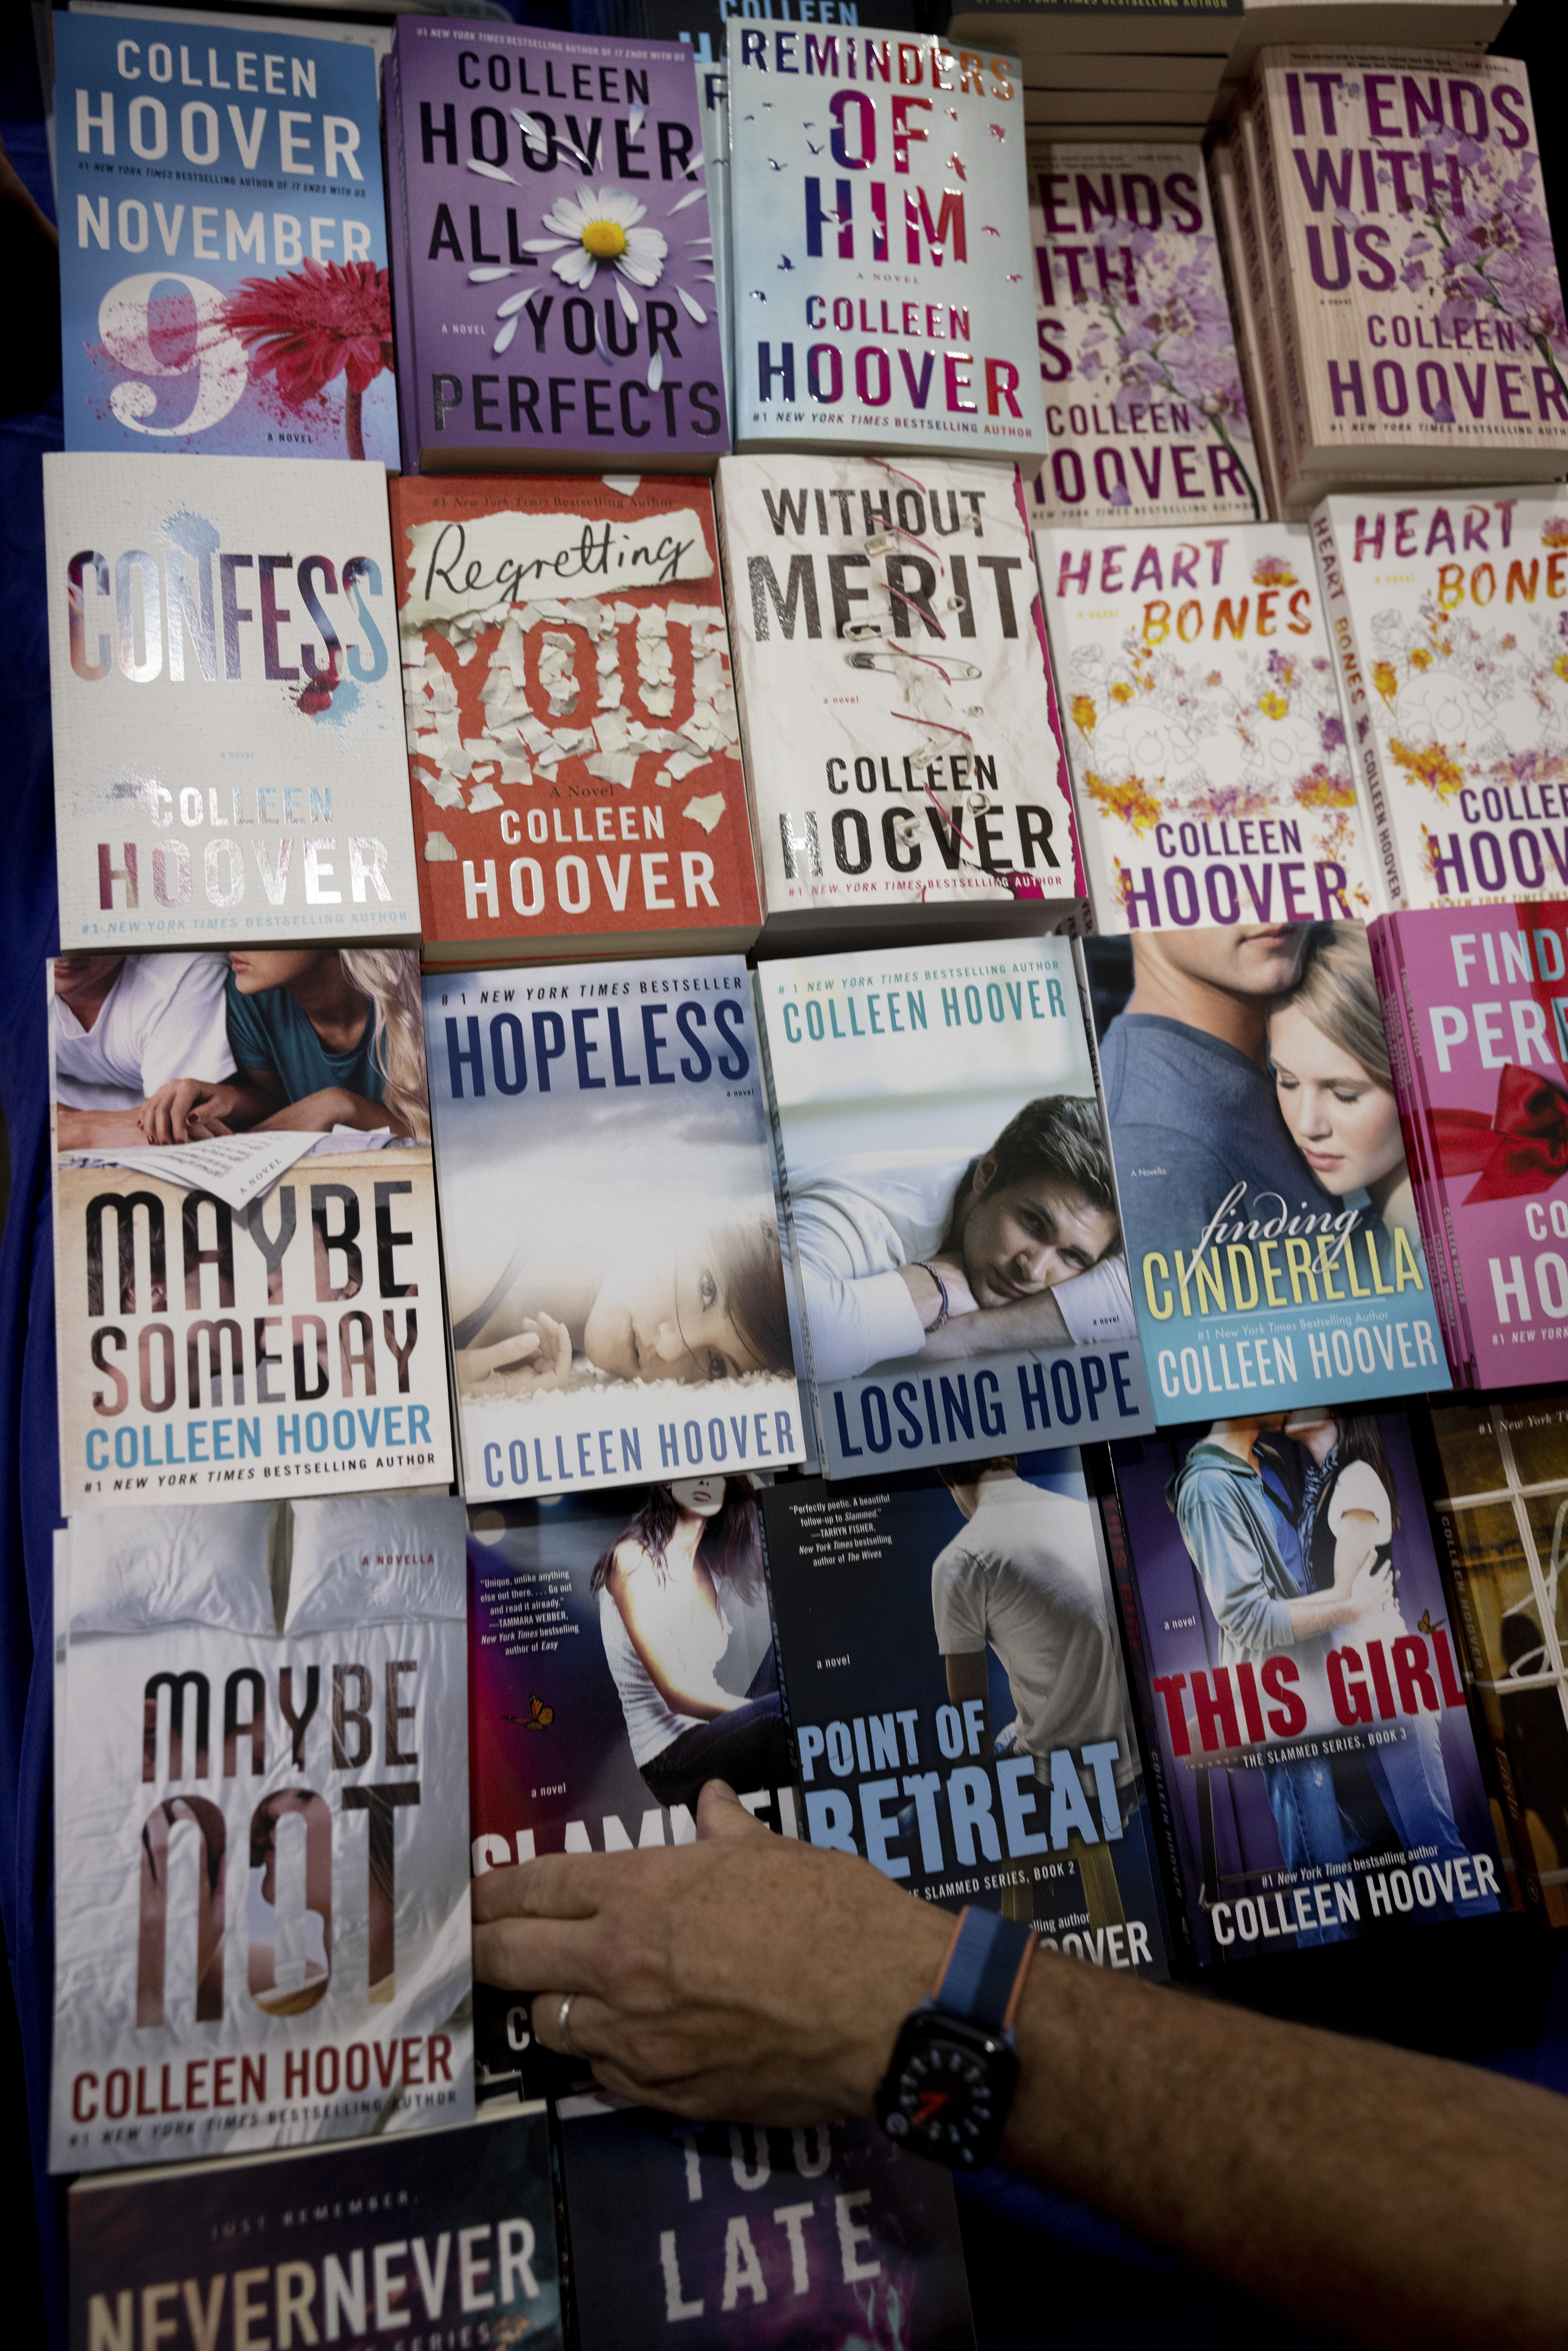 List of Books by Colleen Hoover in French